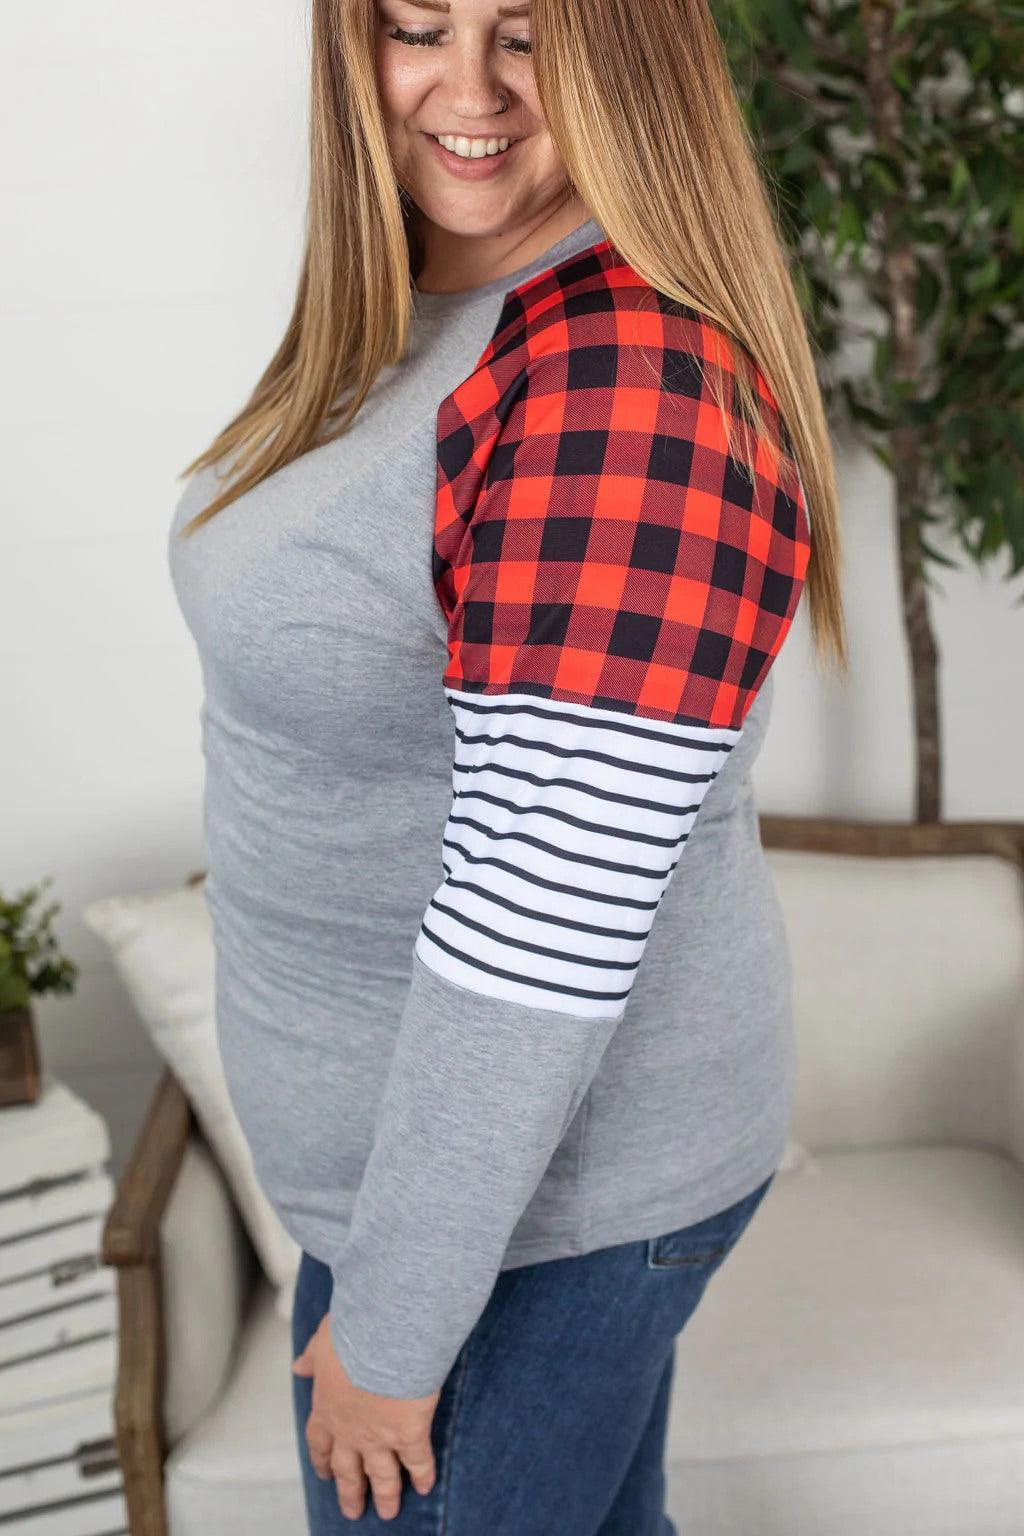 Grey and Buffalo Plaid Accent Sleeve Top - Lavender Latte Boutique